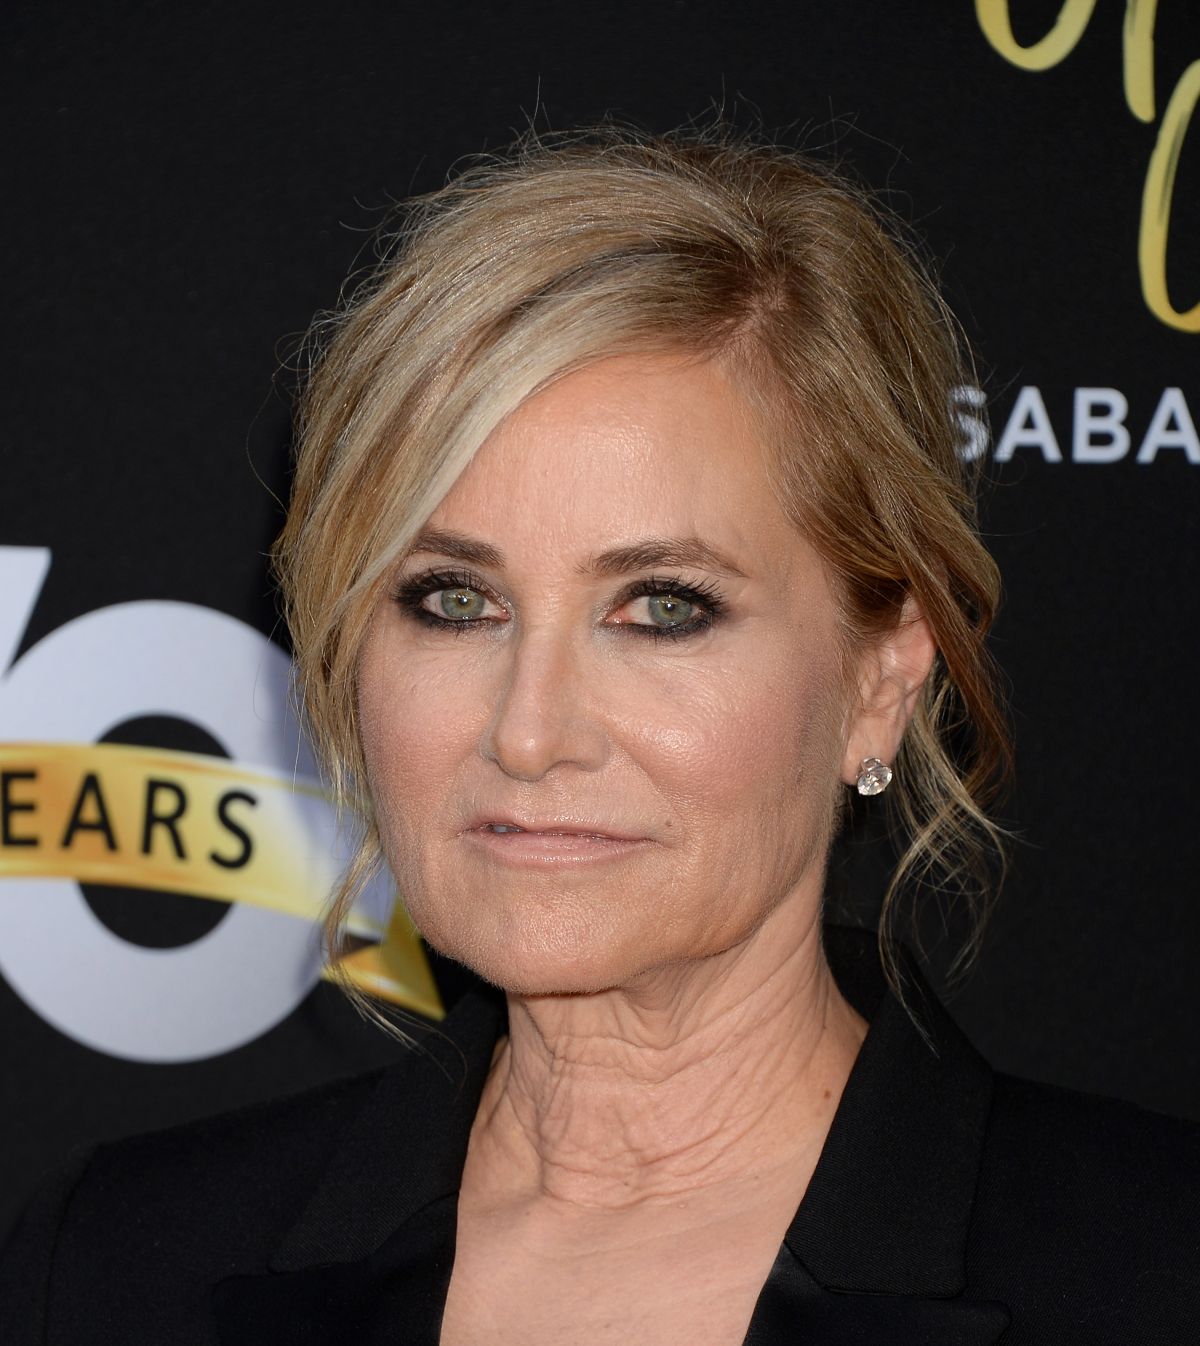 List 90+ Images recent pictures of maureen mccormick Stunning